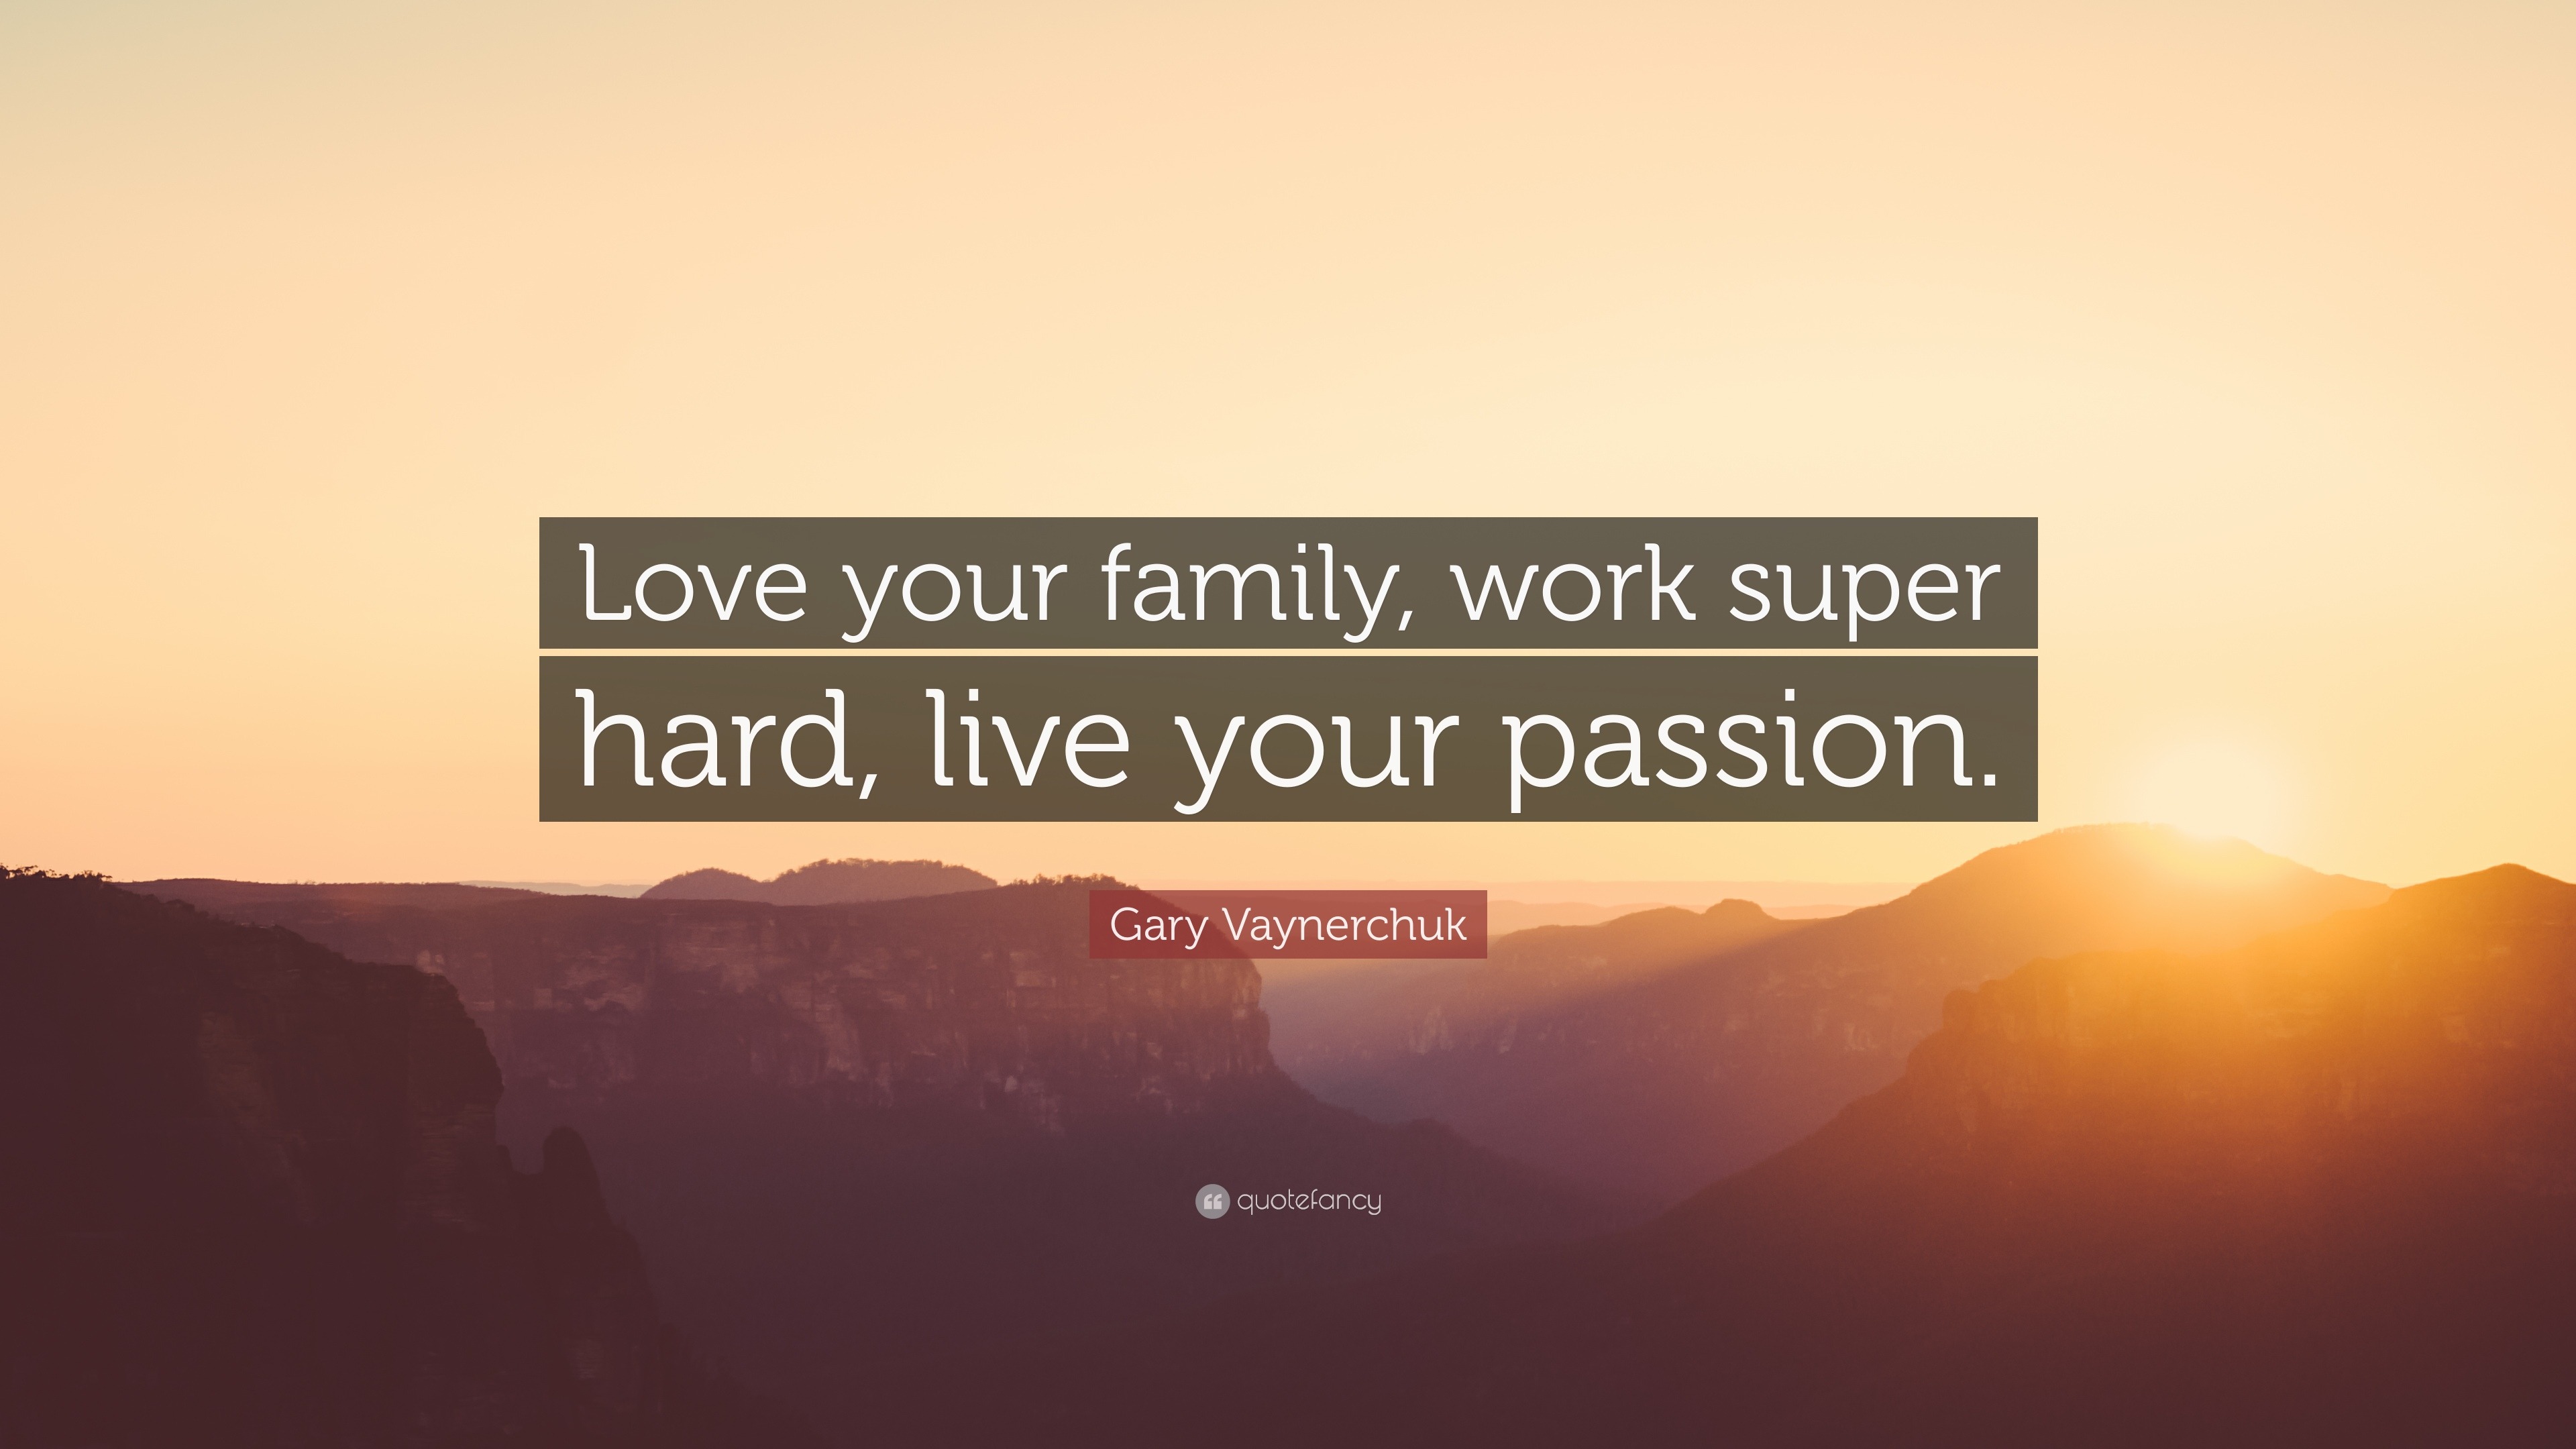 Gary Vaynerchuk Quote “Love your family work super hard live your passion